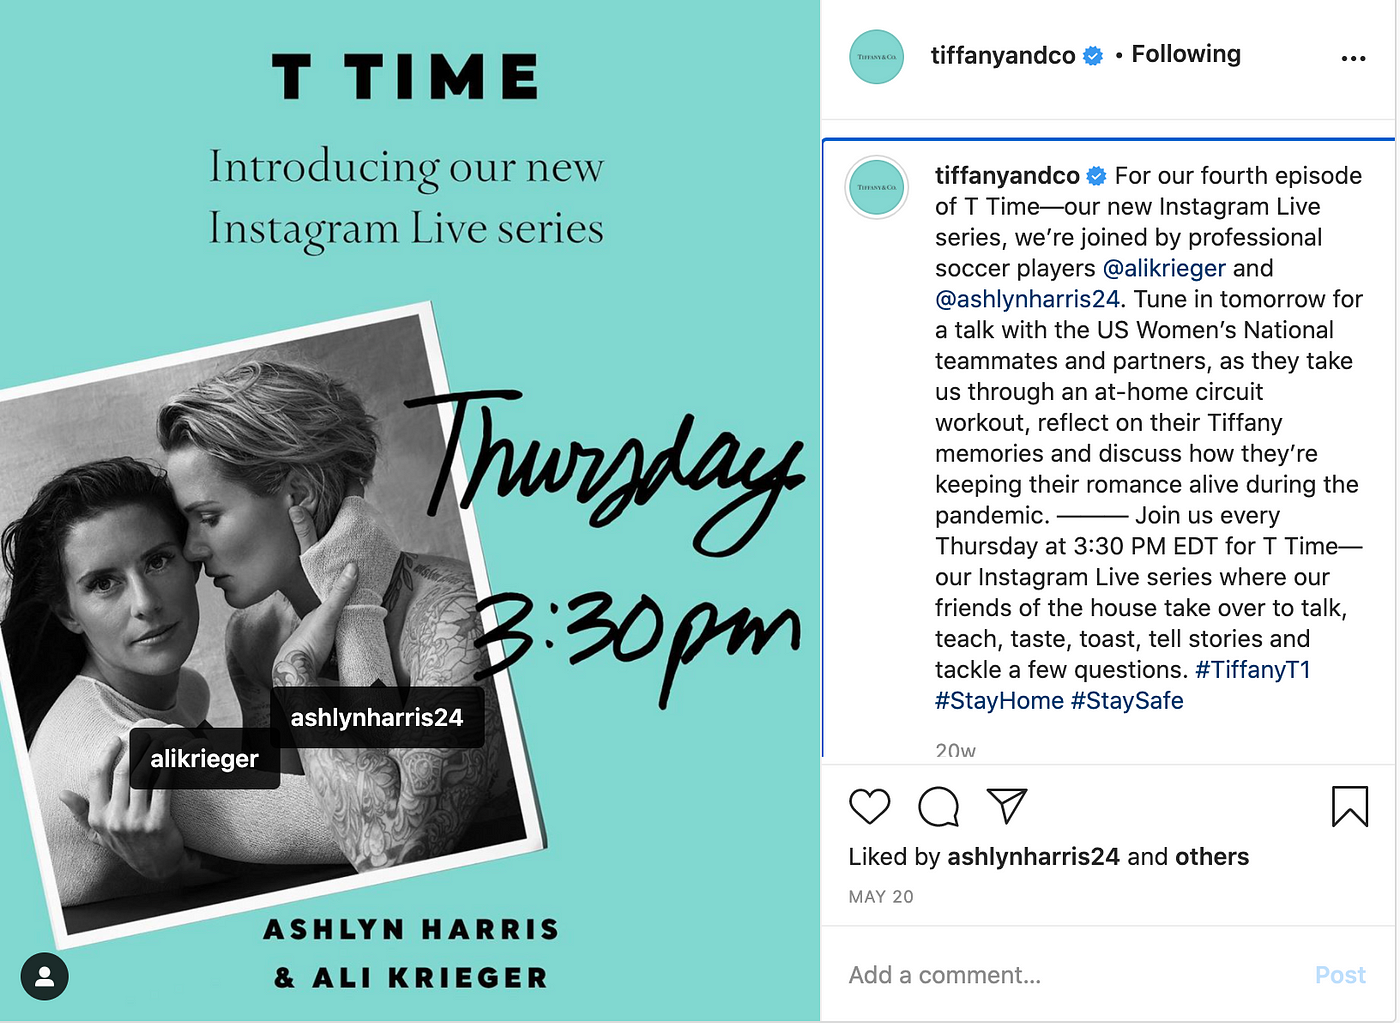 Be inspired by Tiffany & Co.'s new T Time Instagram Live series